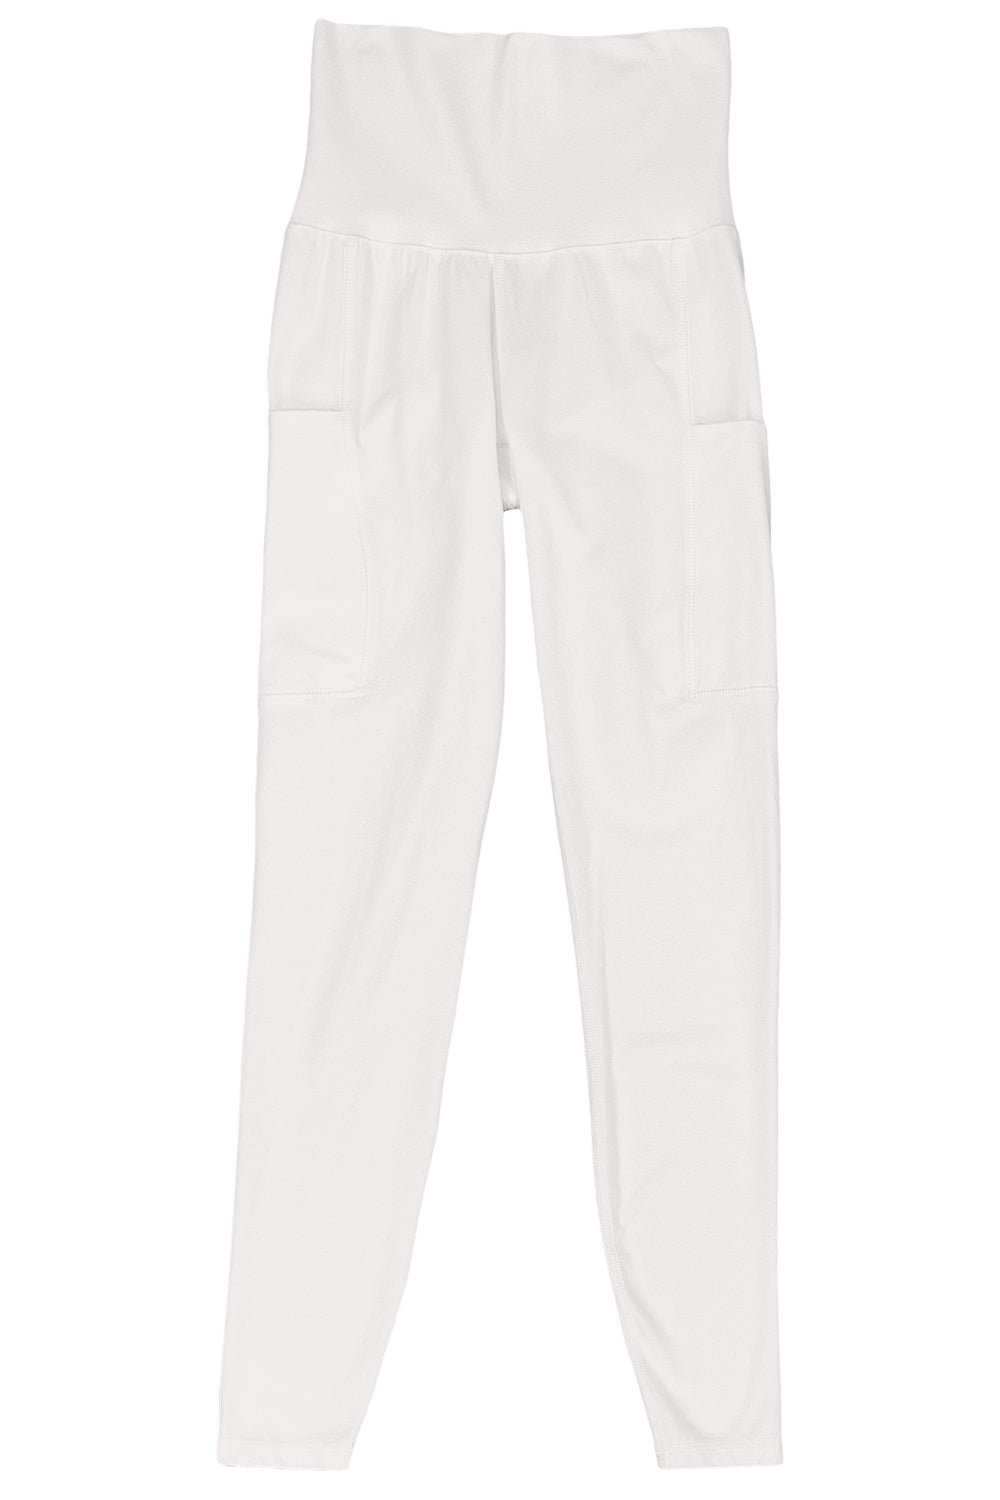 Orosi Pocket Leggings - Mid Rise | Jungmaven Hemp Clothing & Accessories / Color: Washed White